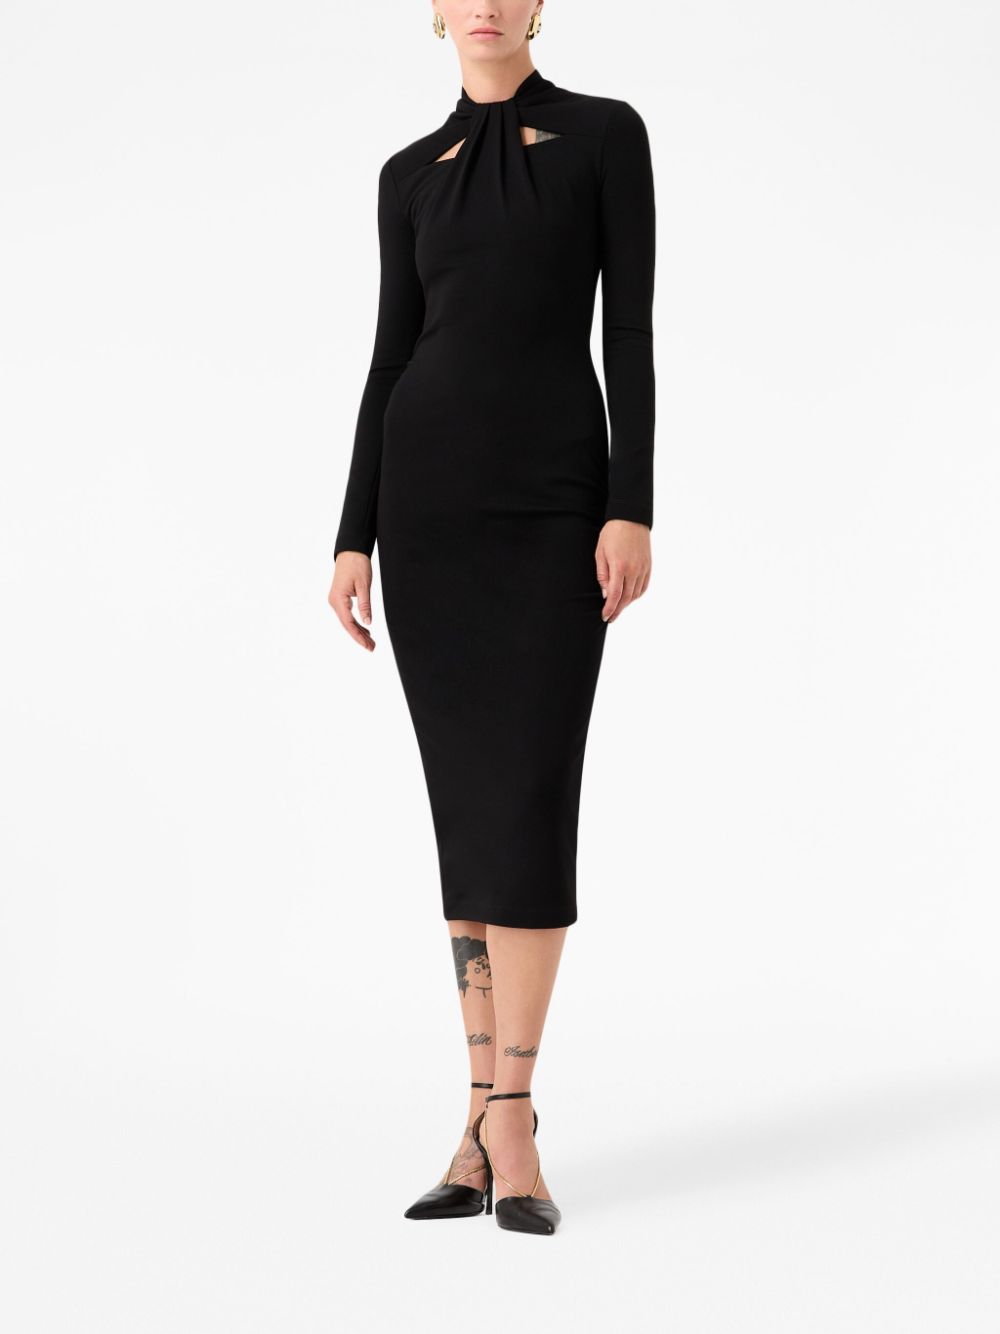 Midi dress with cut-out detail